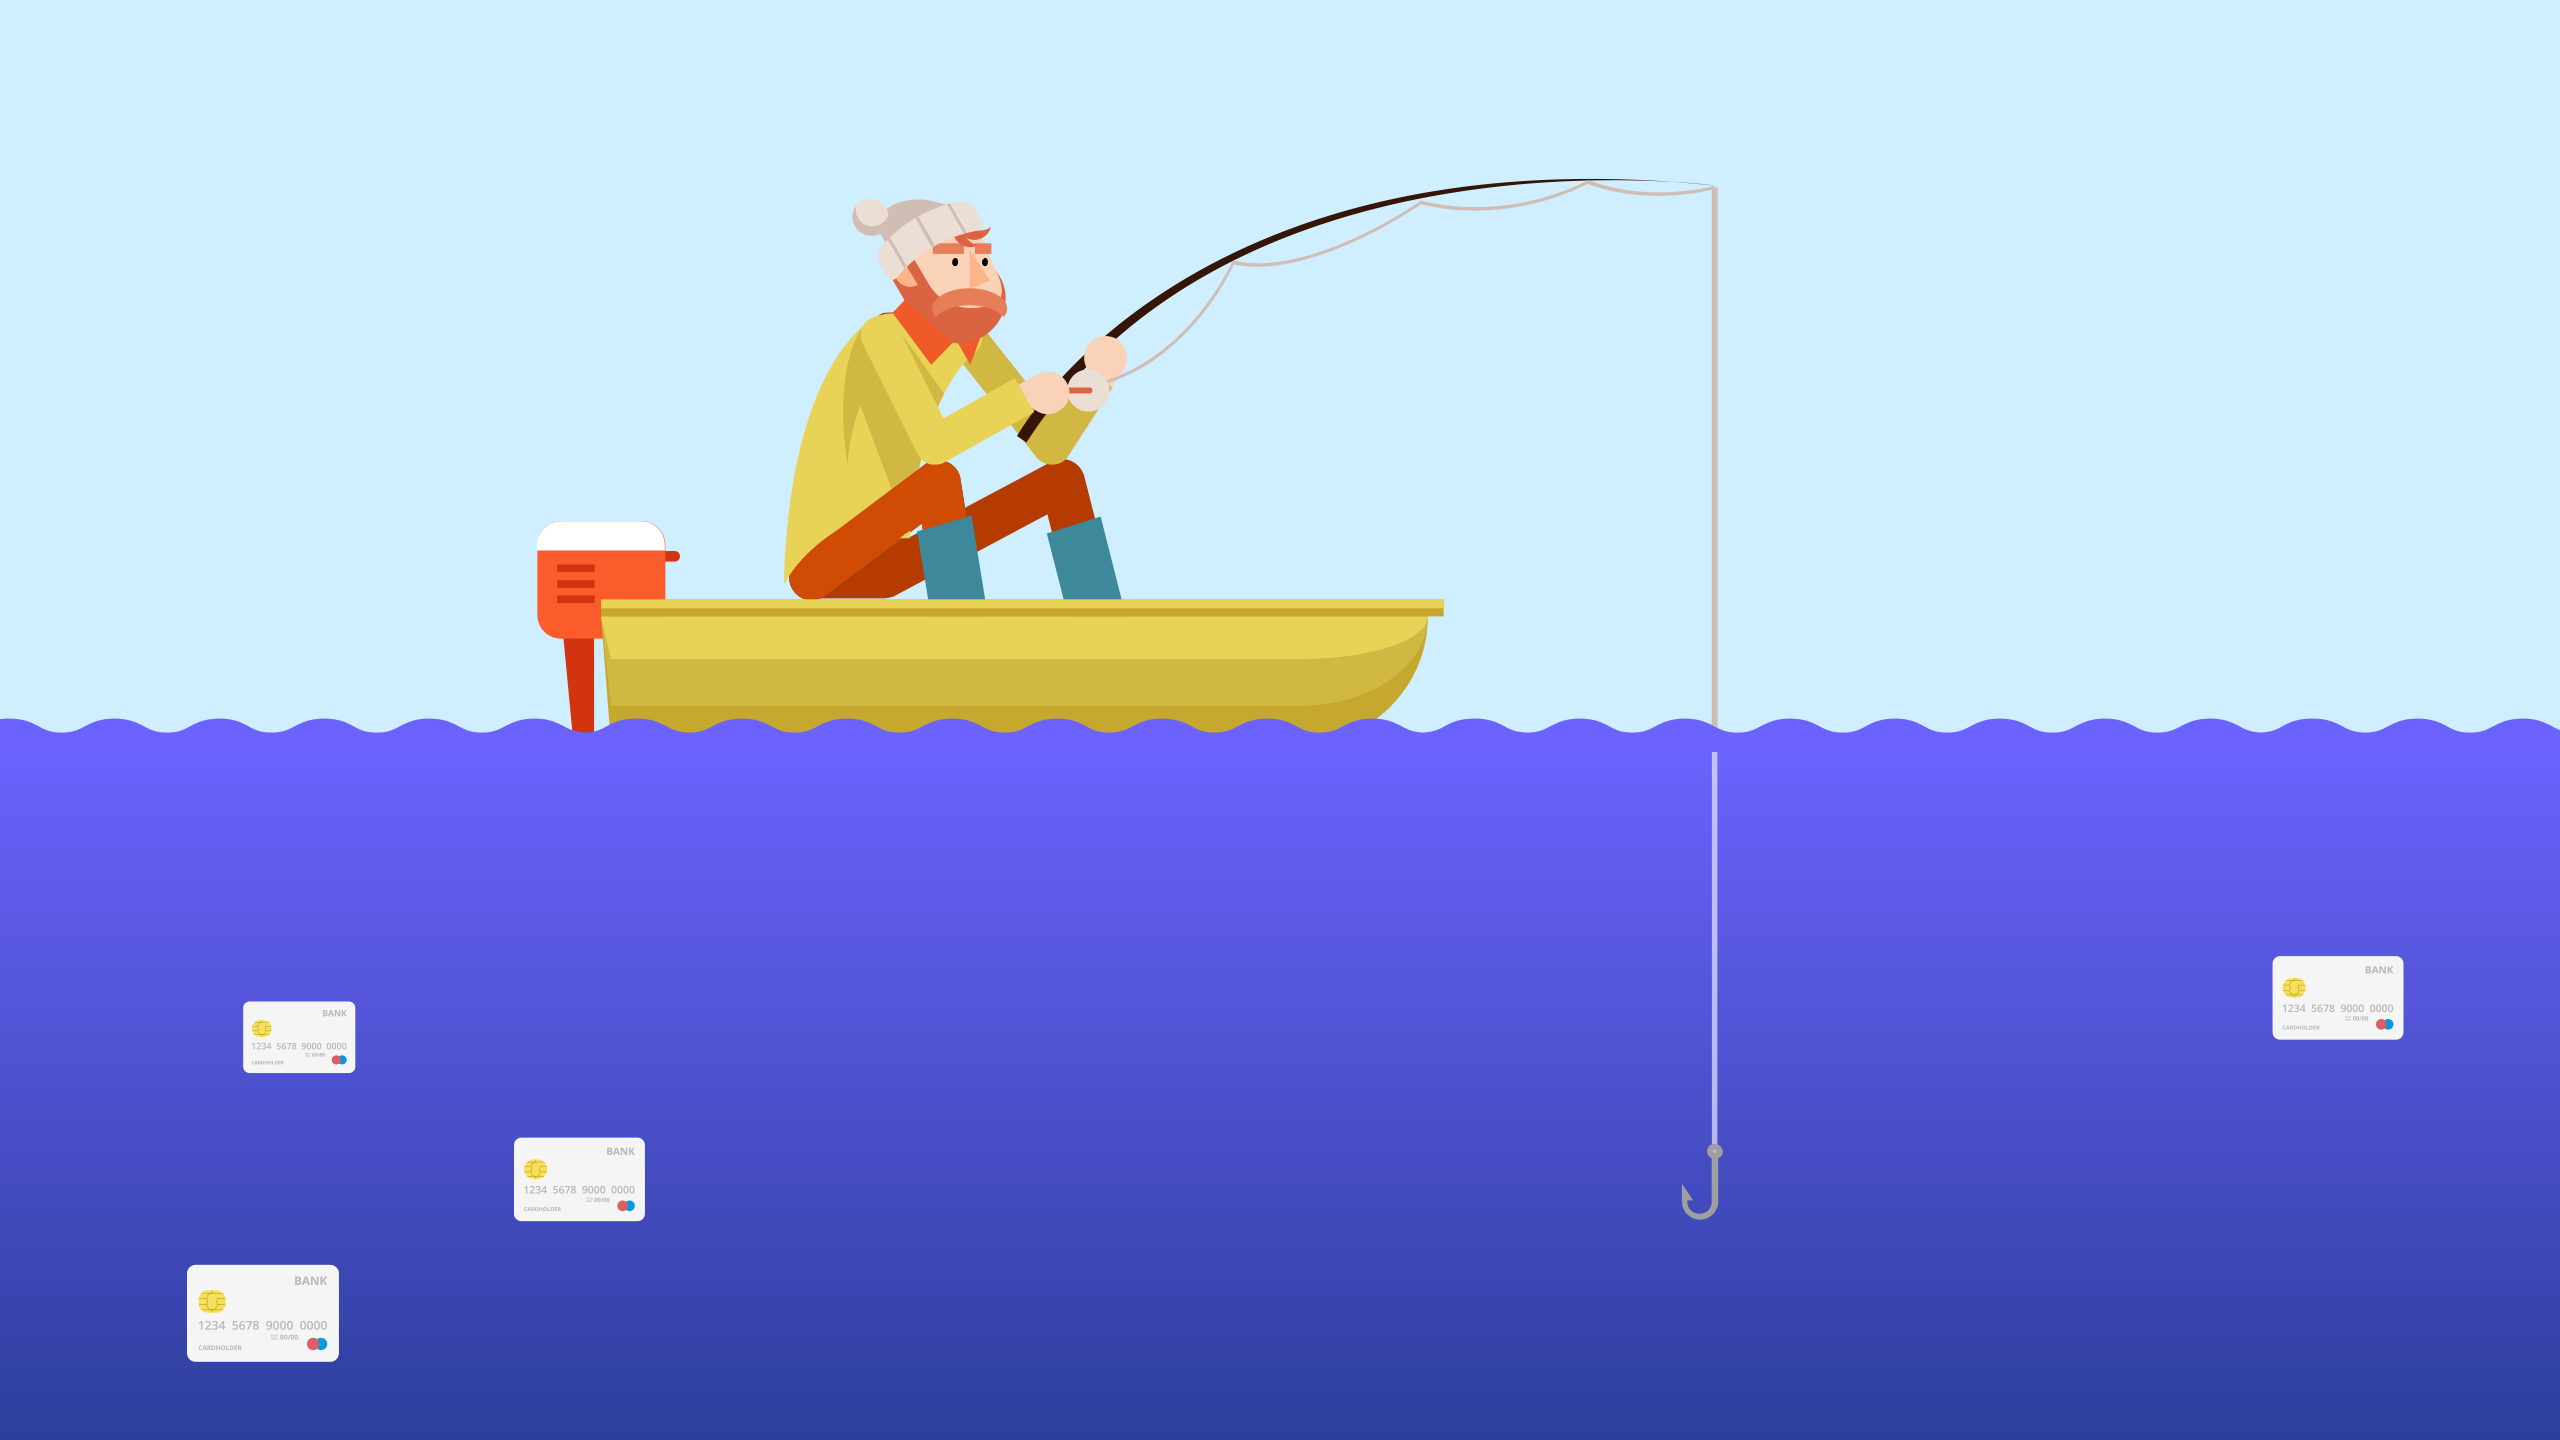 Illustration of online phishing - A man fishing for credit cards